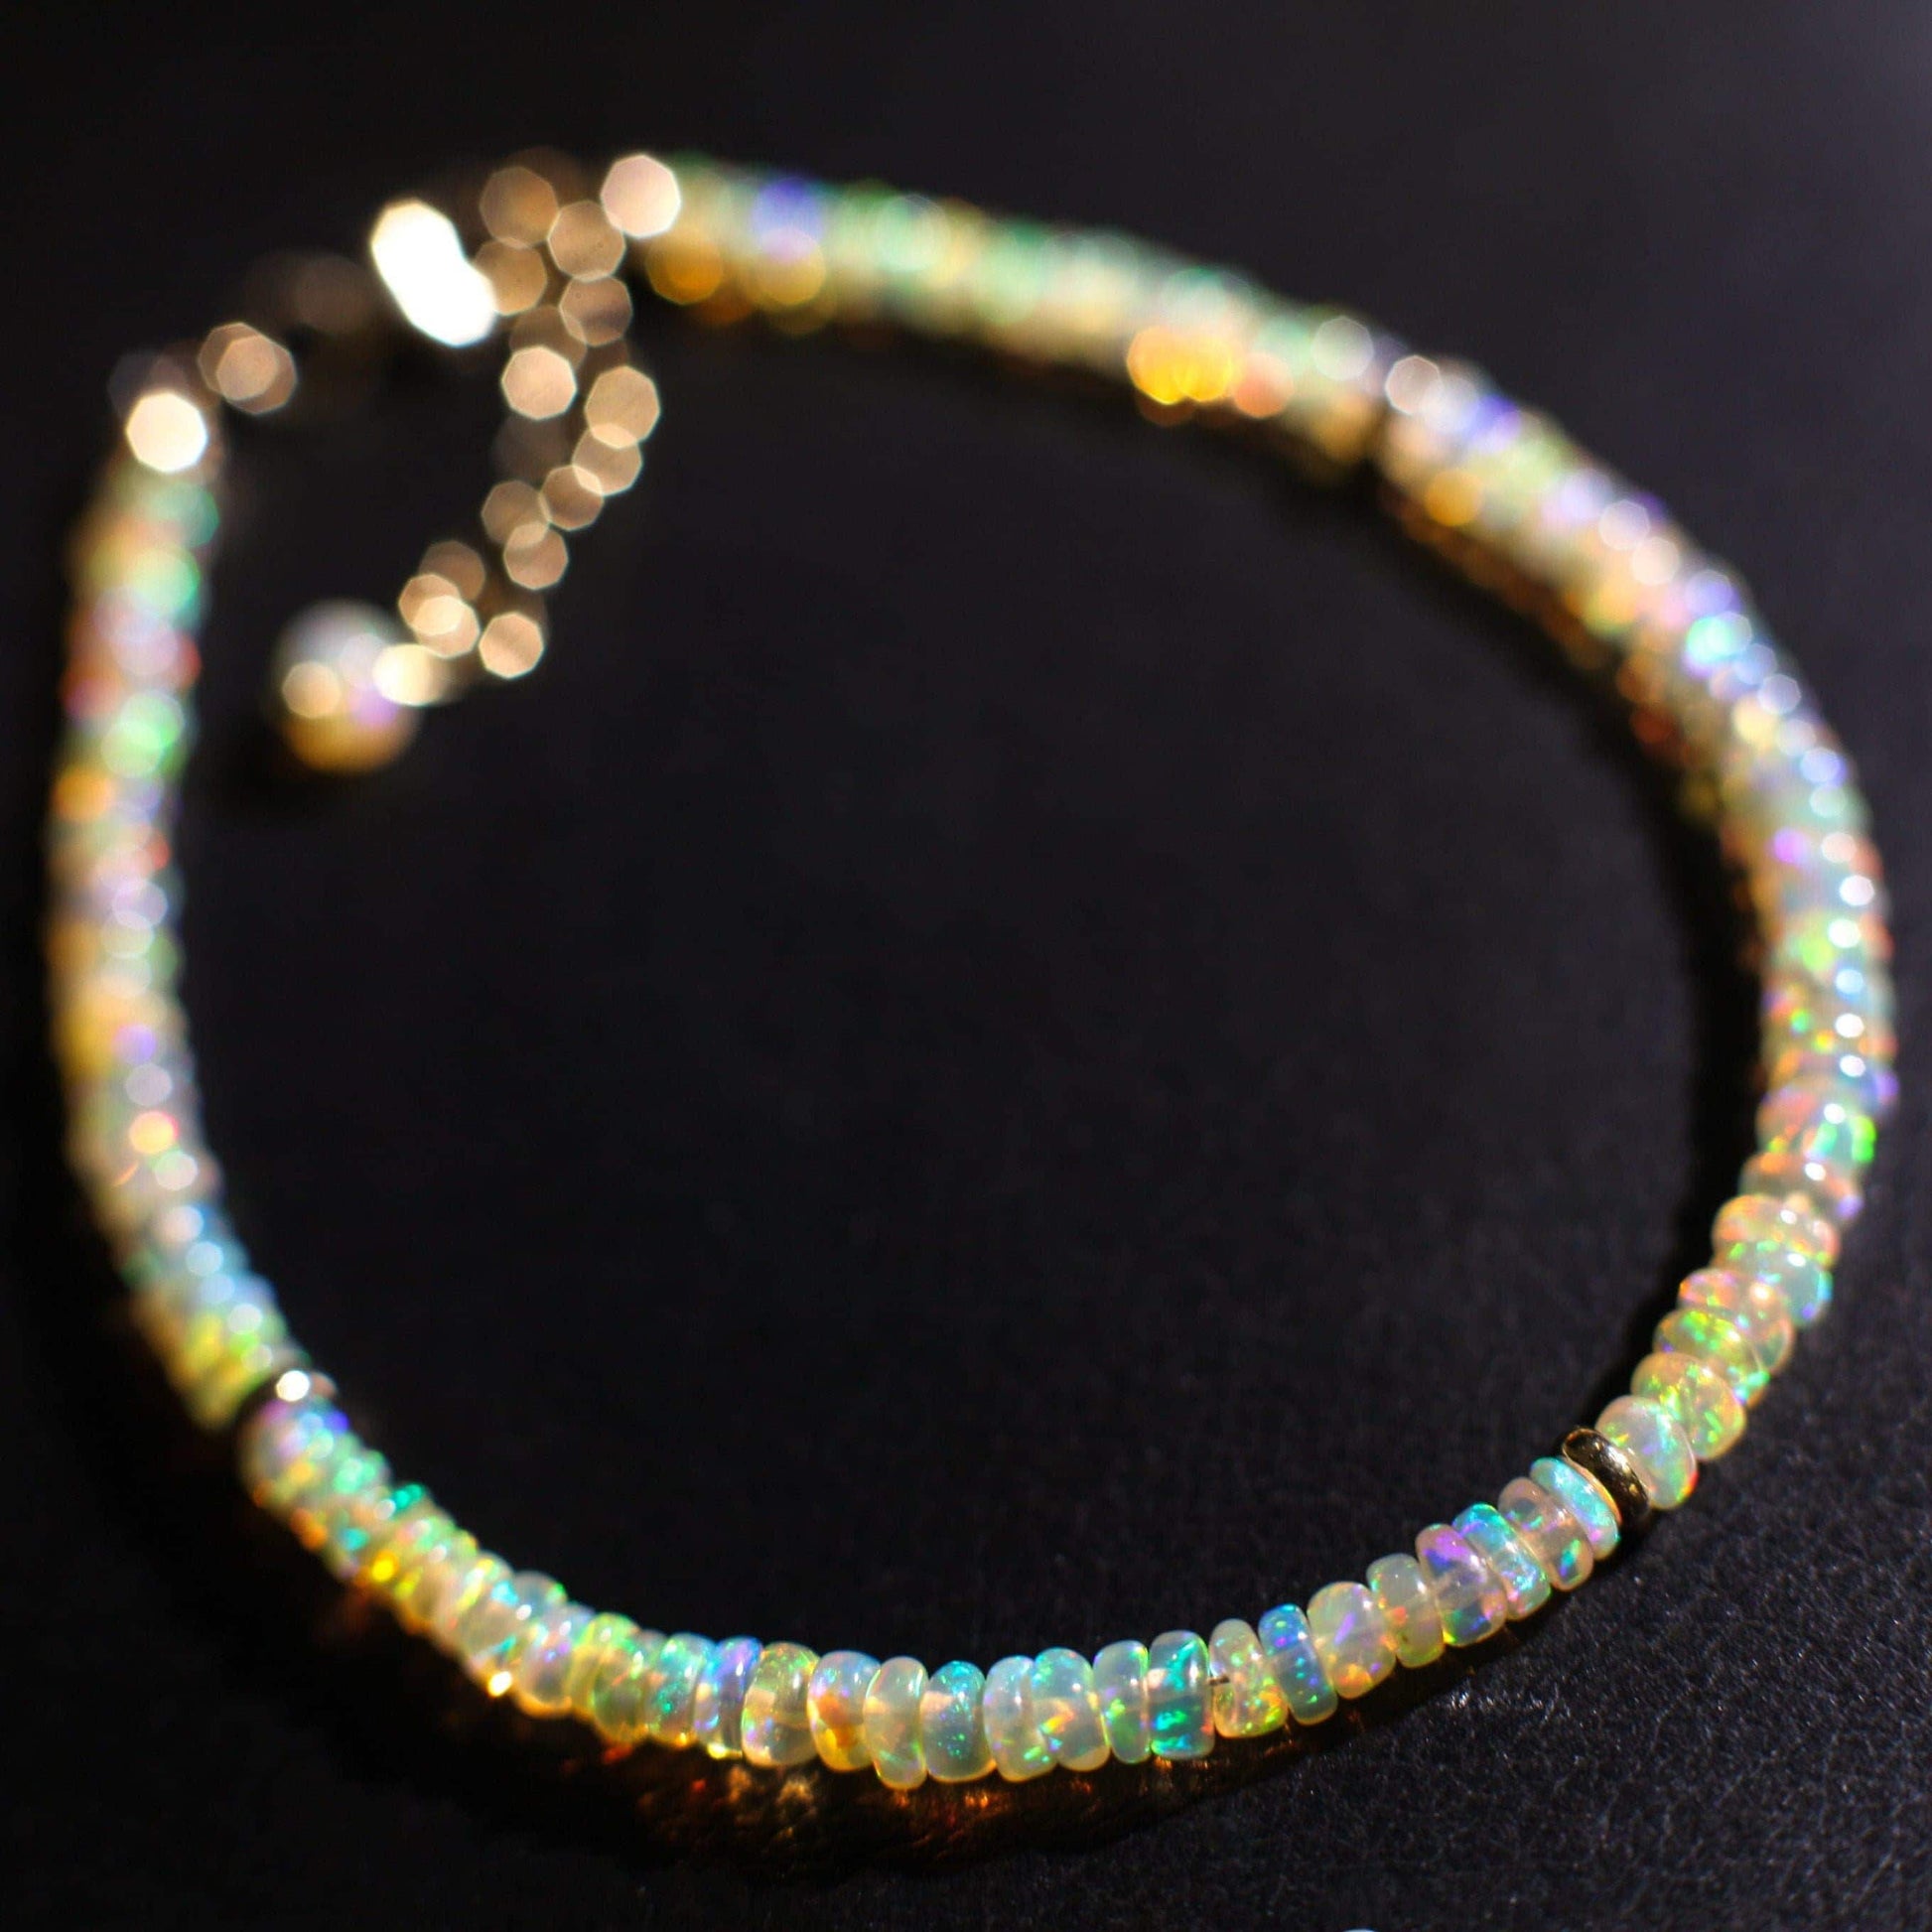 Genuine Ethiopian Fire Opal 3-3.75mm Smooth Graduated Roundel Bracelet, AAA Quality Fiery Opal Bracelet in 14K Gold Filled Chain with 1&quot; Ext